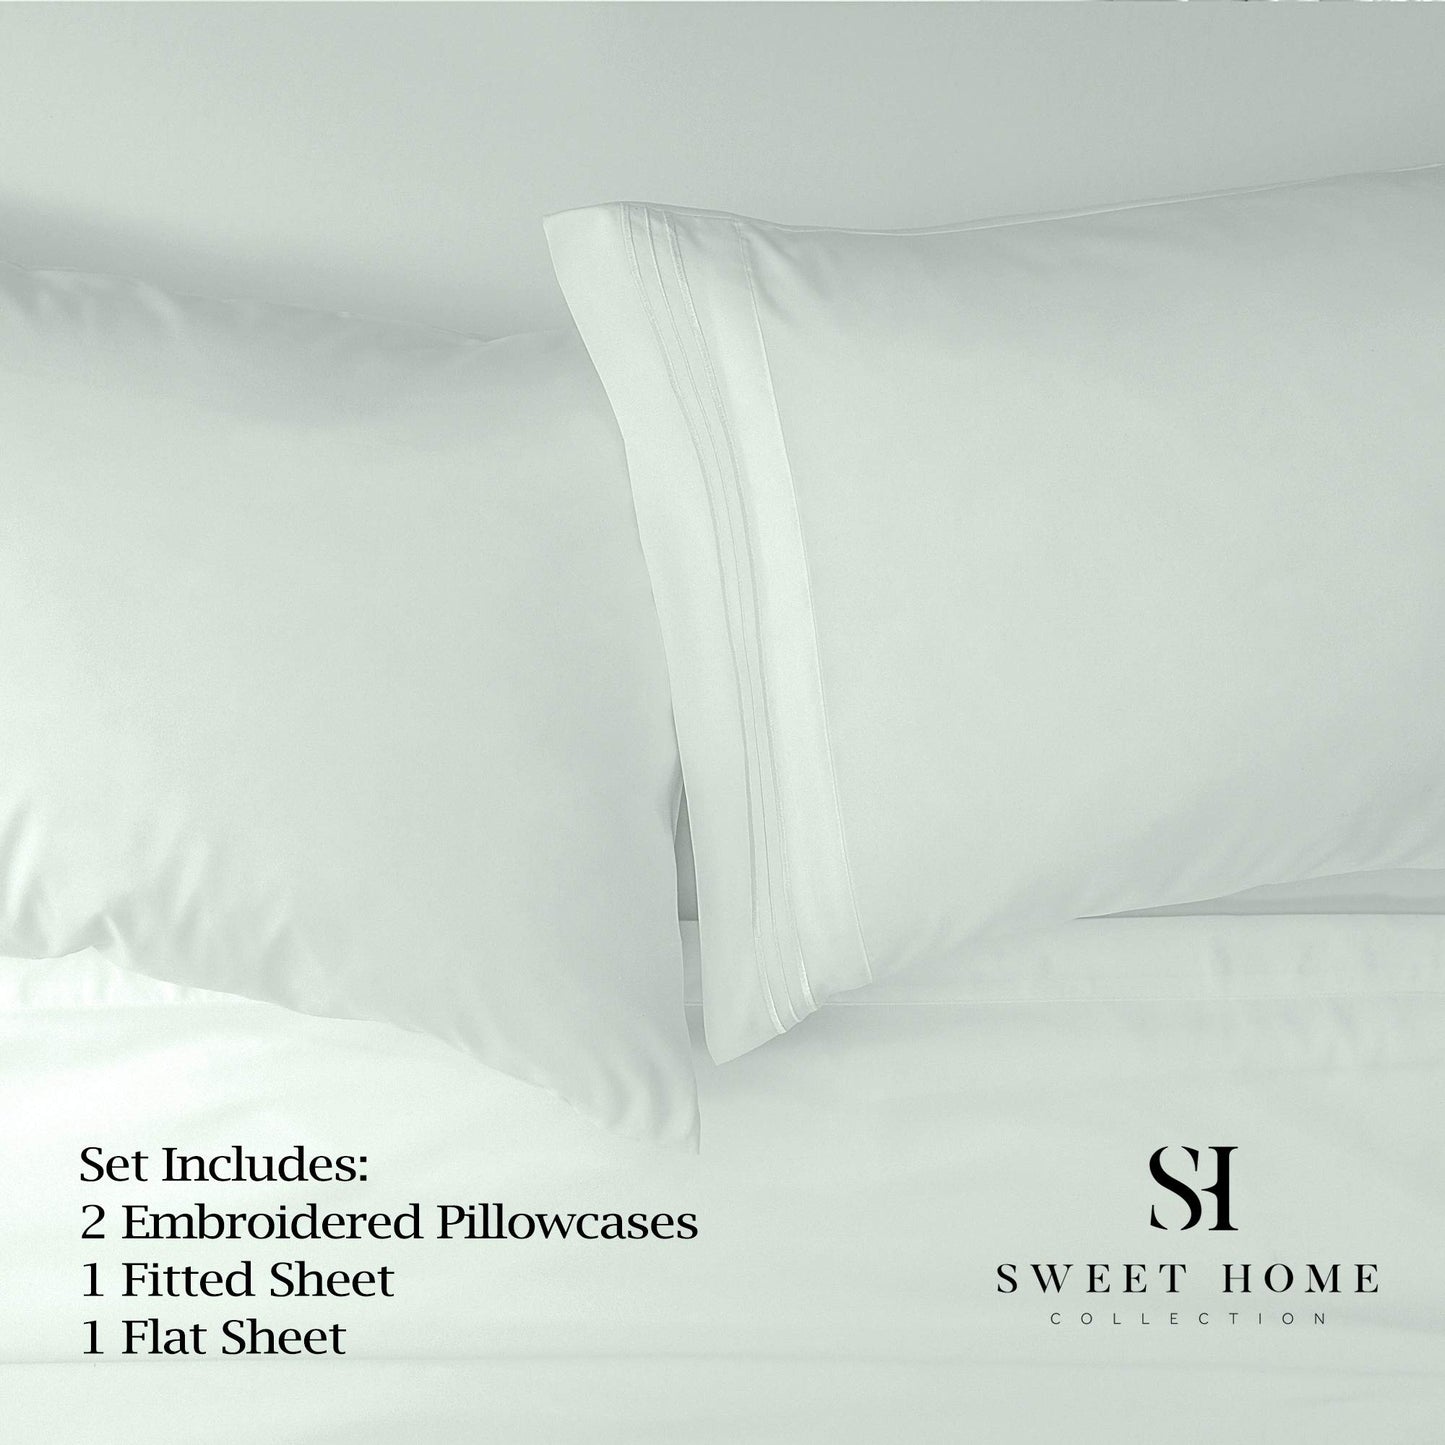 1500 Supreme Collection King Sheet Sets Mint Green - Luxury Hotel Bed Sheets and Pillowcase Set for King Mattress - Extra Soft, Elastic Corner Straps, Deep Pocket Sheets, King Mint Green